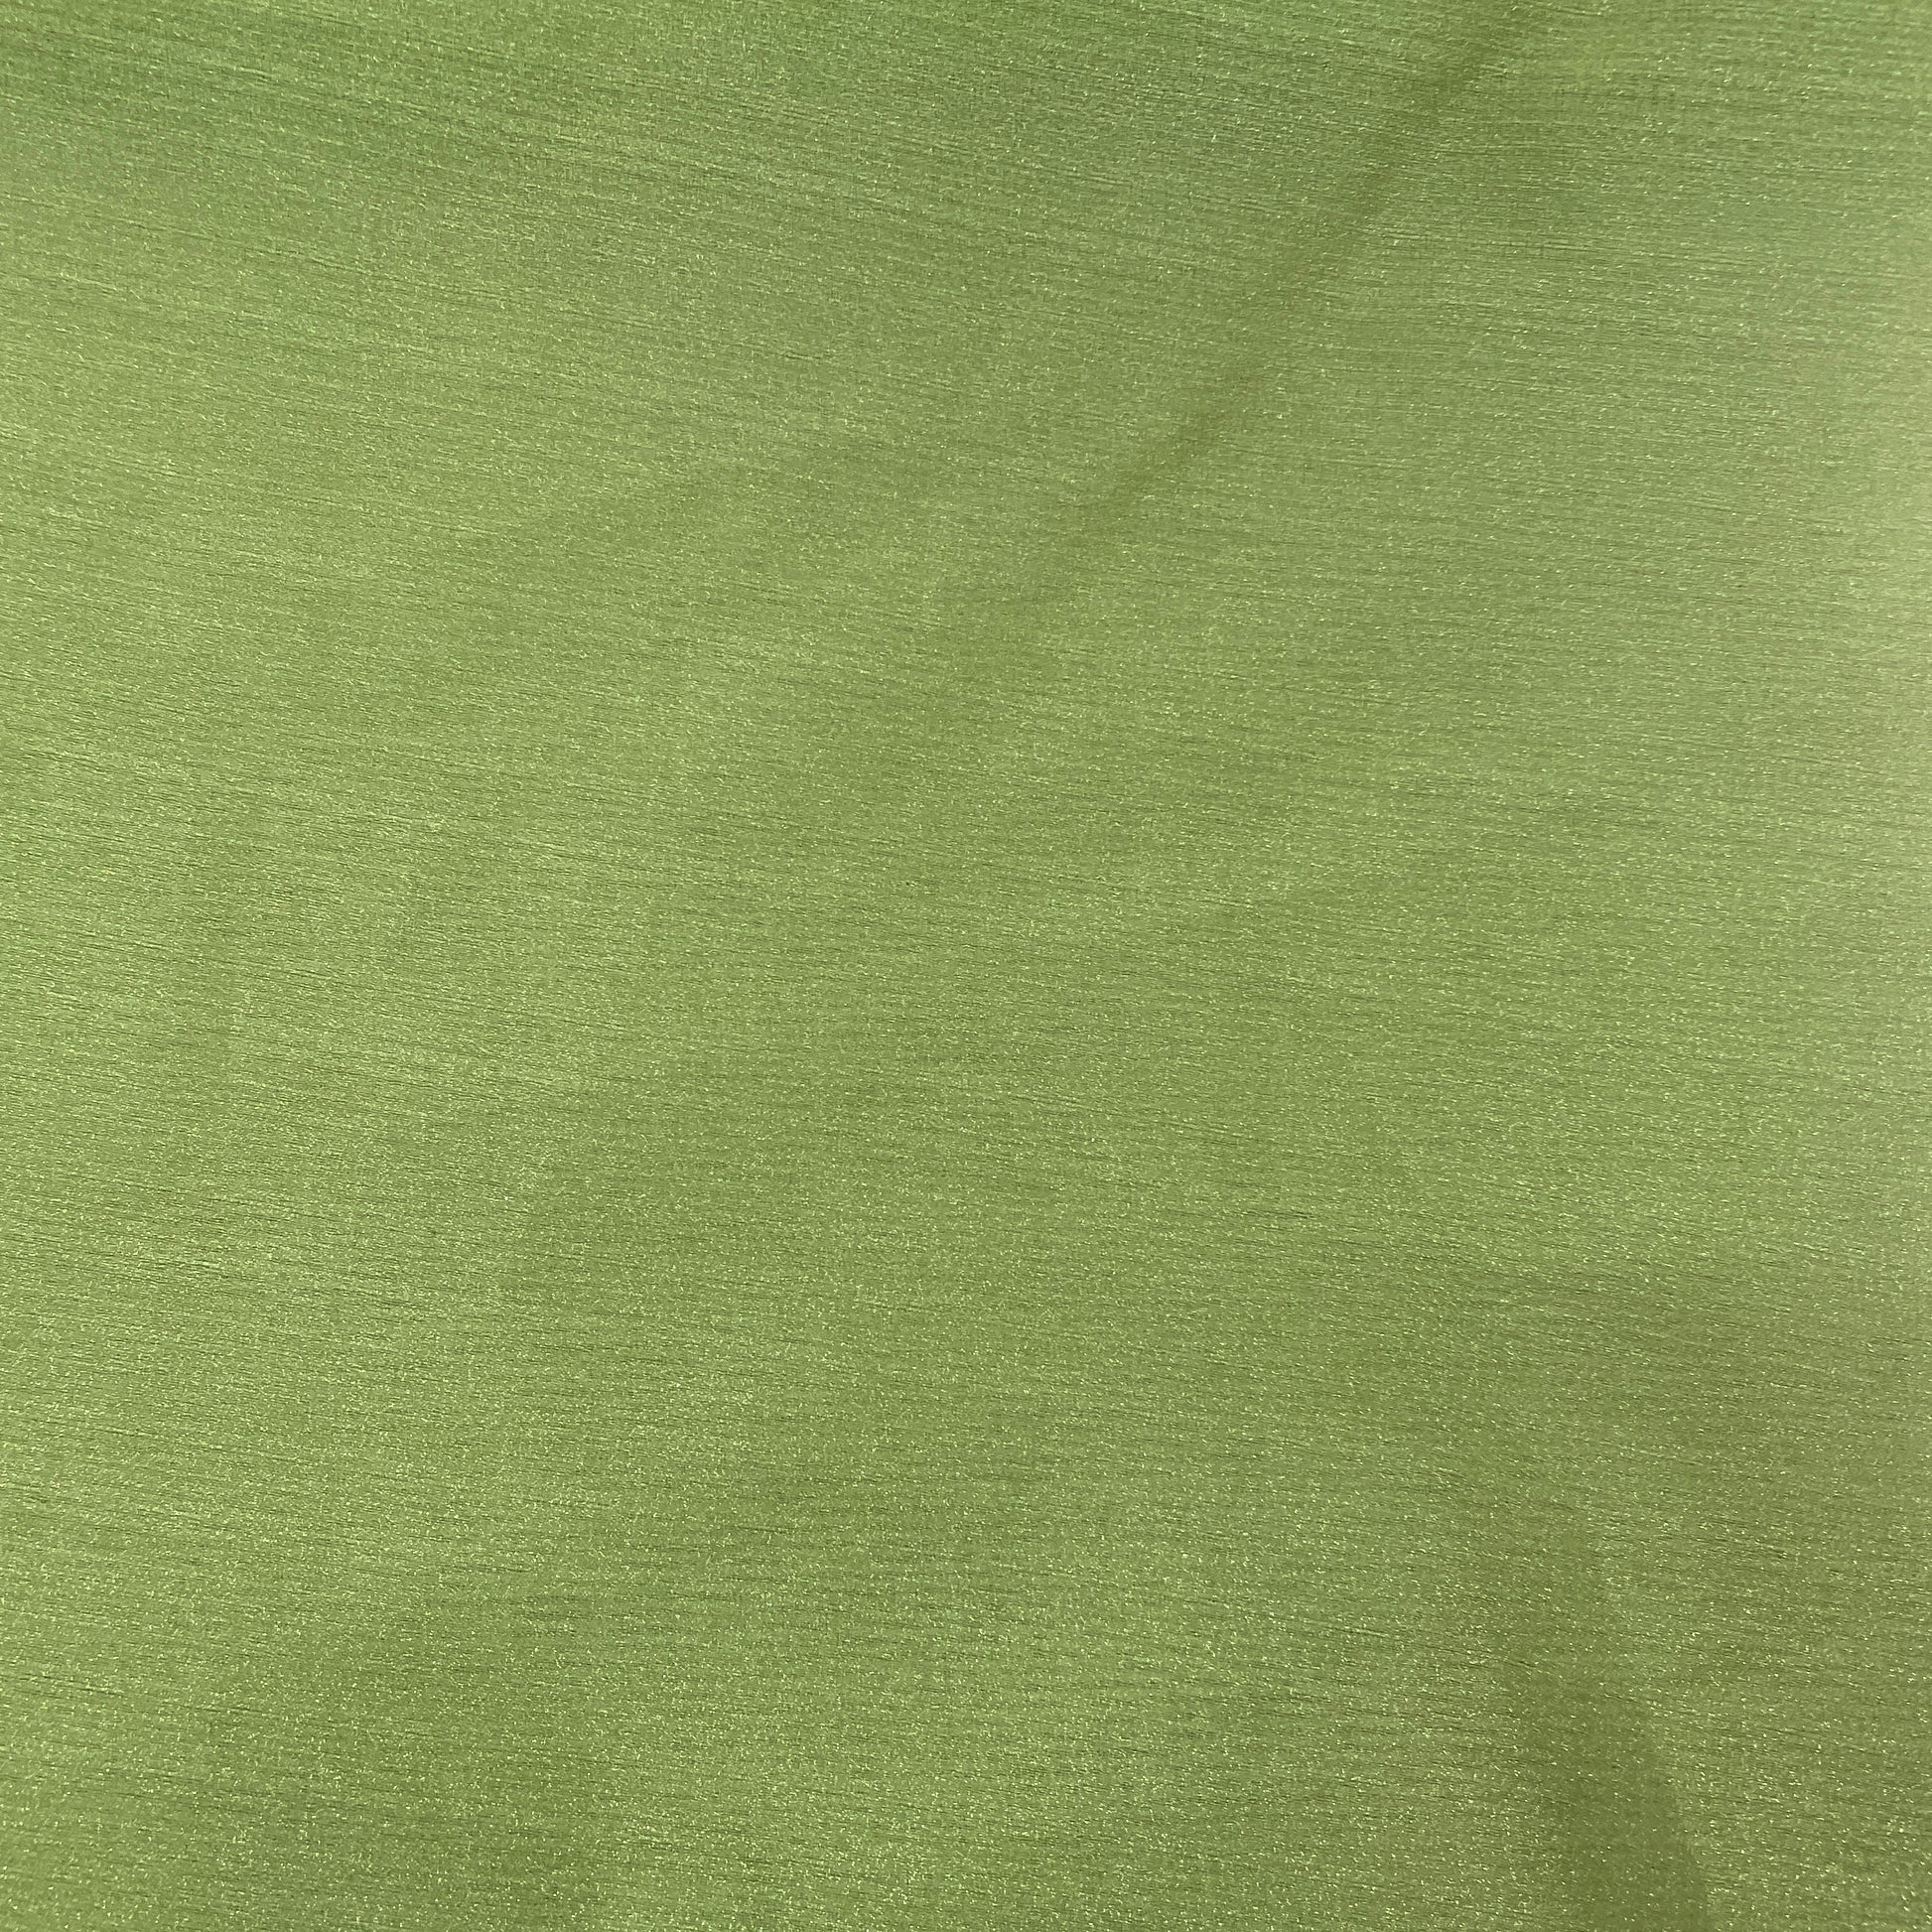 Olive Green Solid Tissue Fabric - TradeUNO